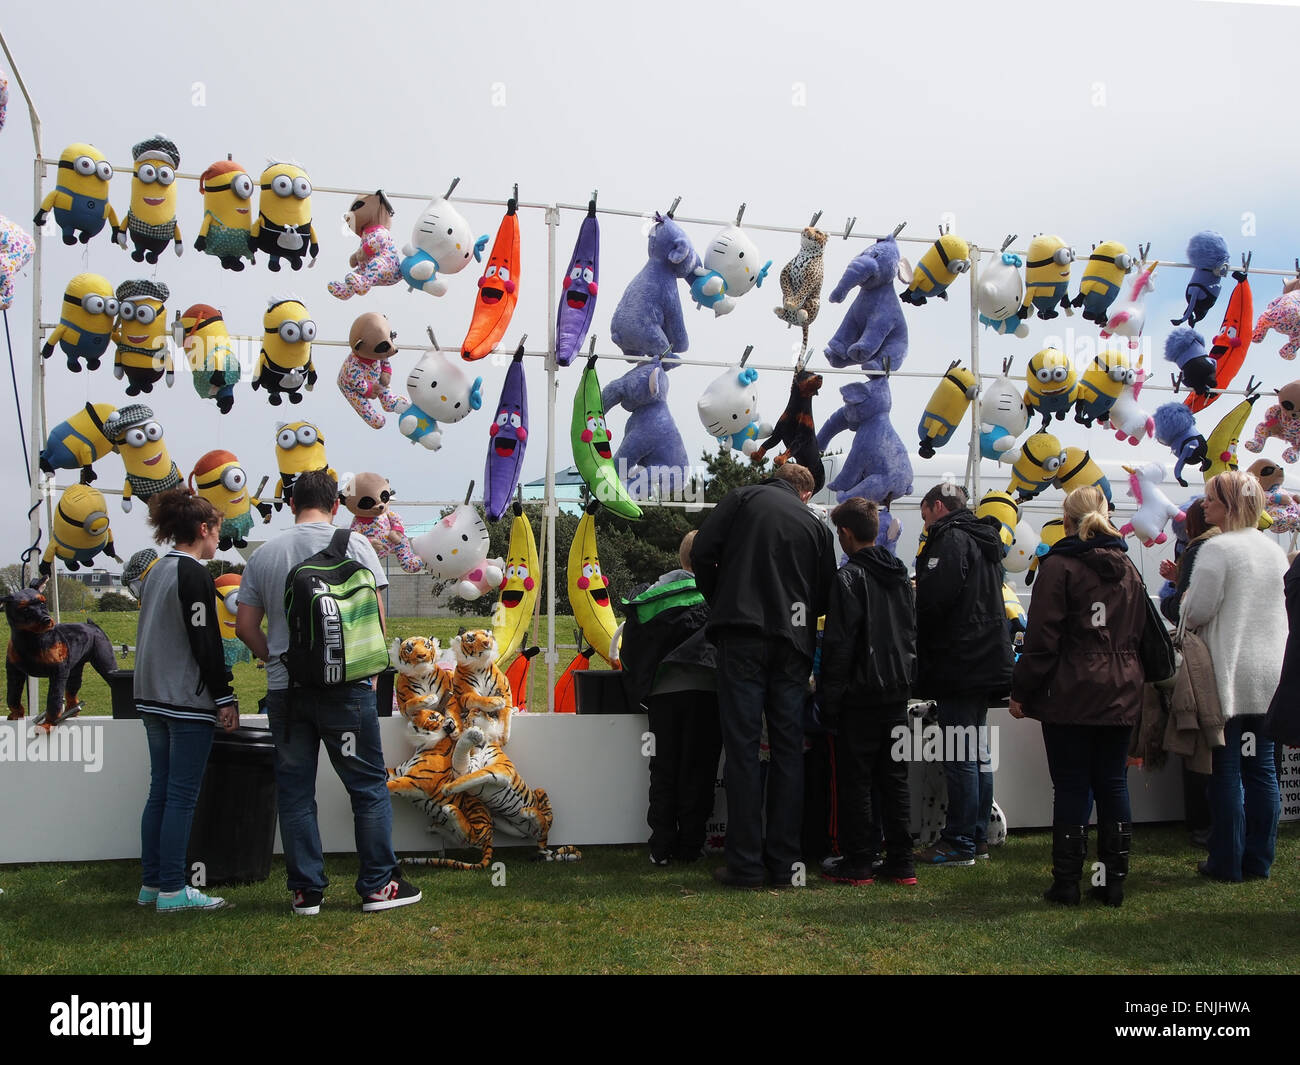 A tombola ticket stall at a fairground with cuddly toy prizes Stock Photo